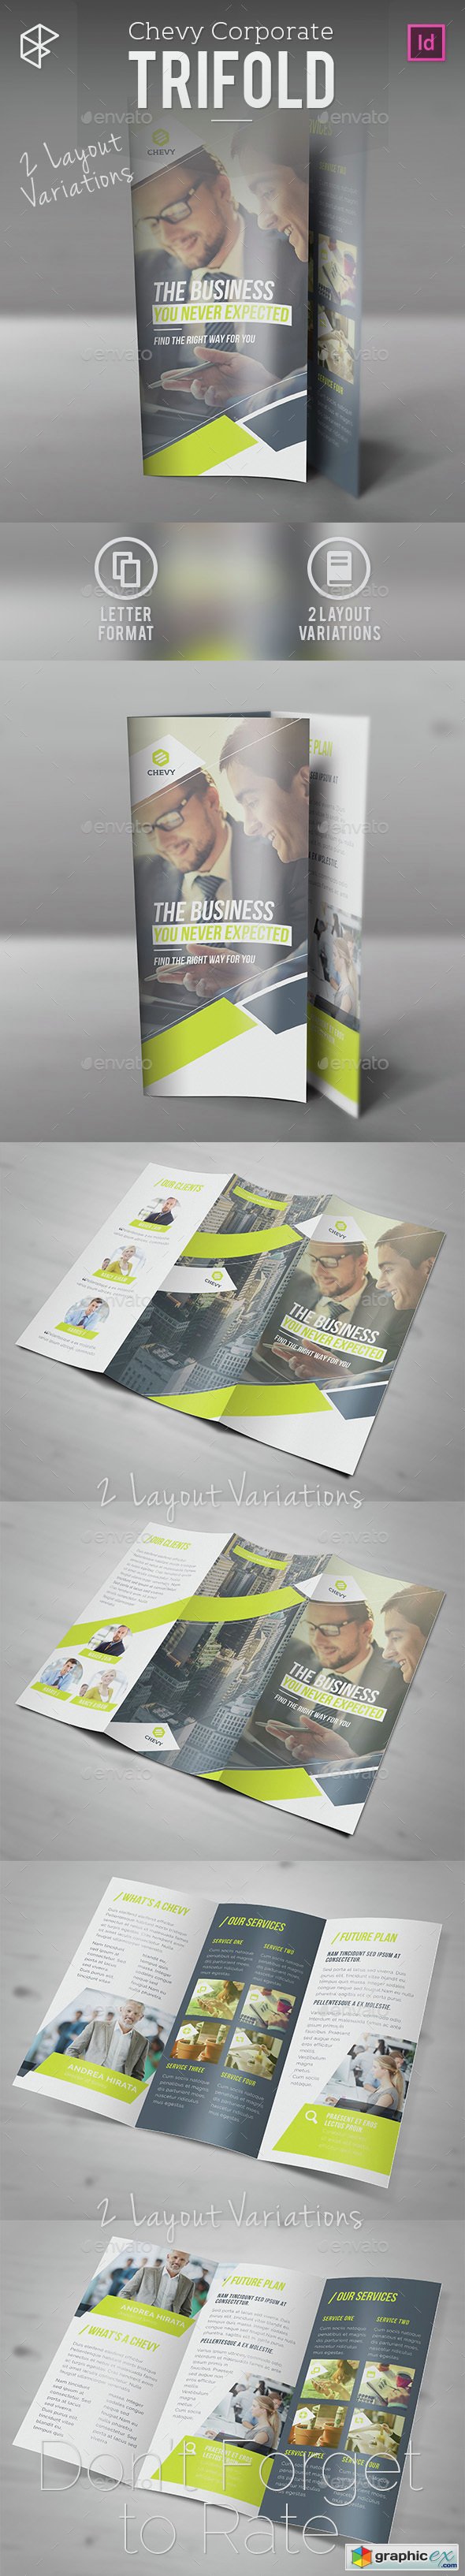 Chevy Corporate Trifold